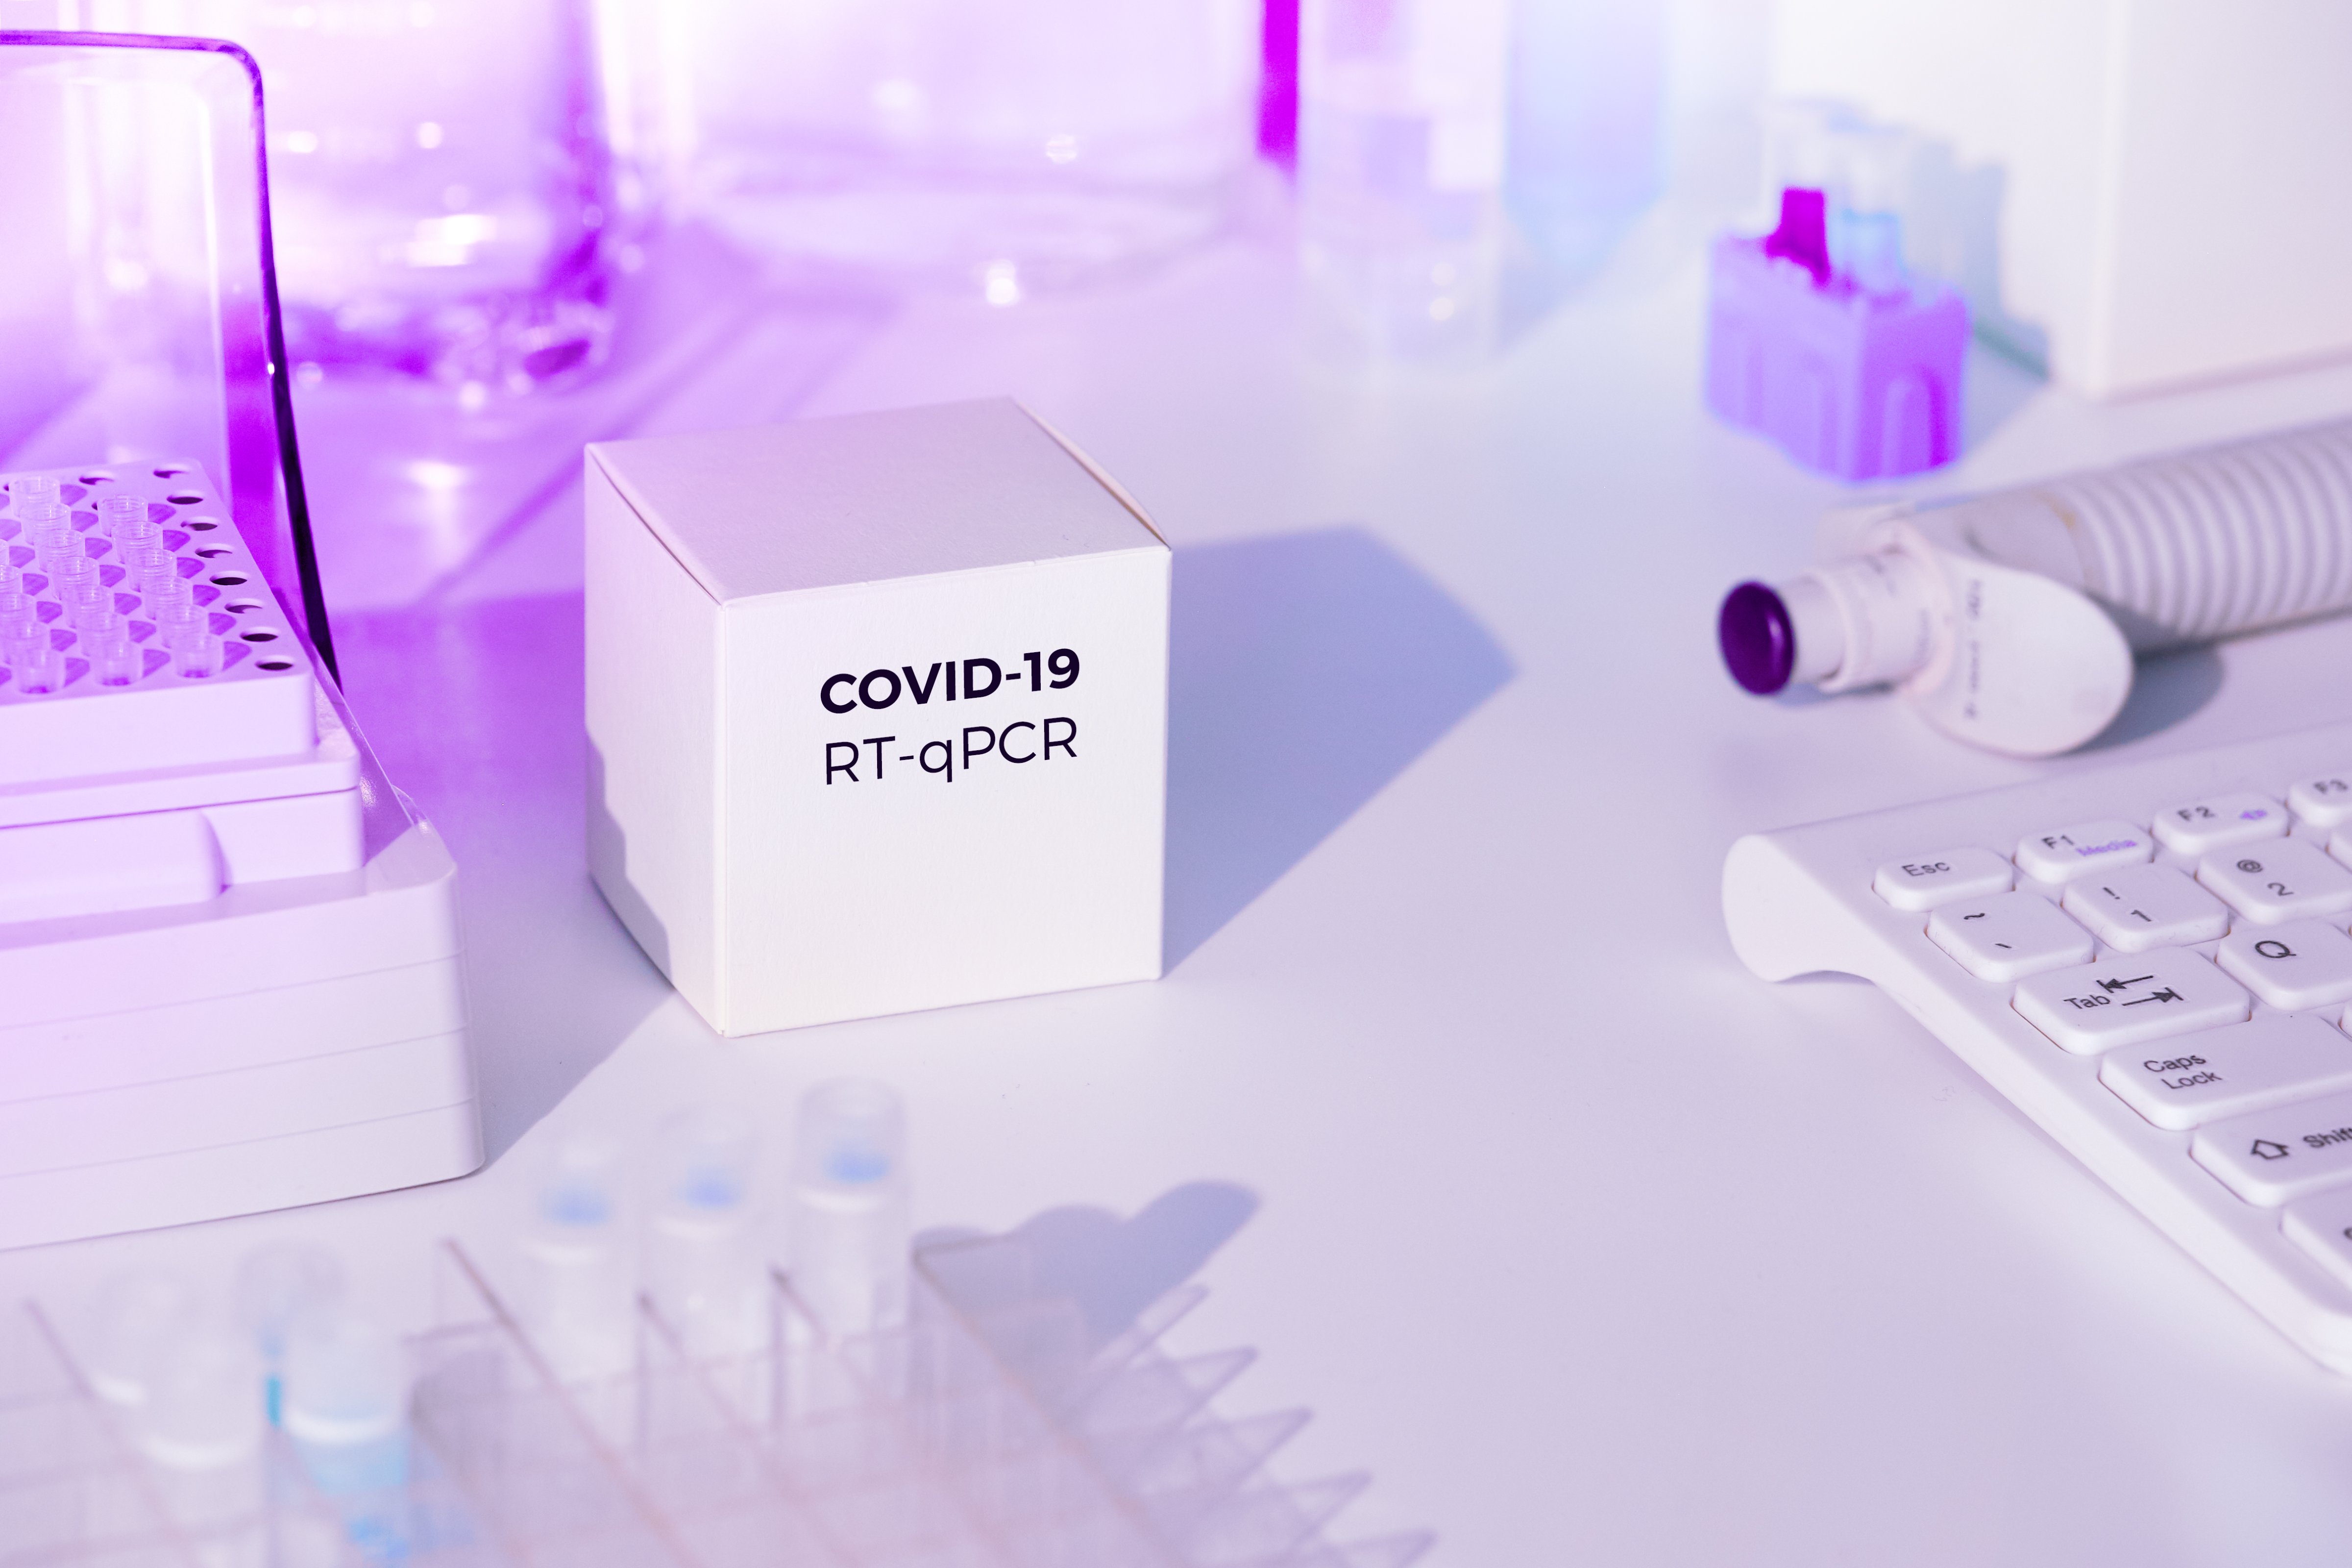 Test kit to detect novel COVID-19 coronavirus in patient samples. RT-PCR kit reagents allow to convert viral Covid19 RNA to DNA and amplify region of viral DNA specific for 2019-nCov.